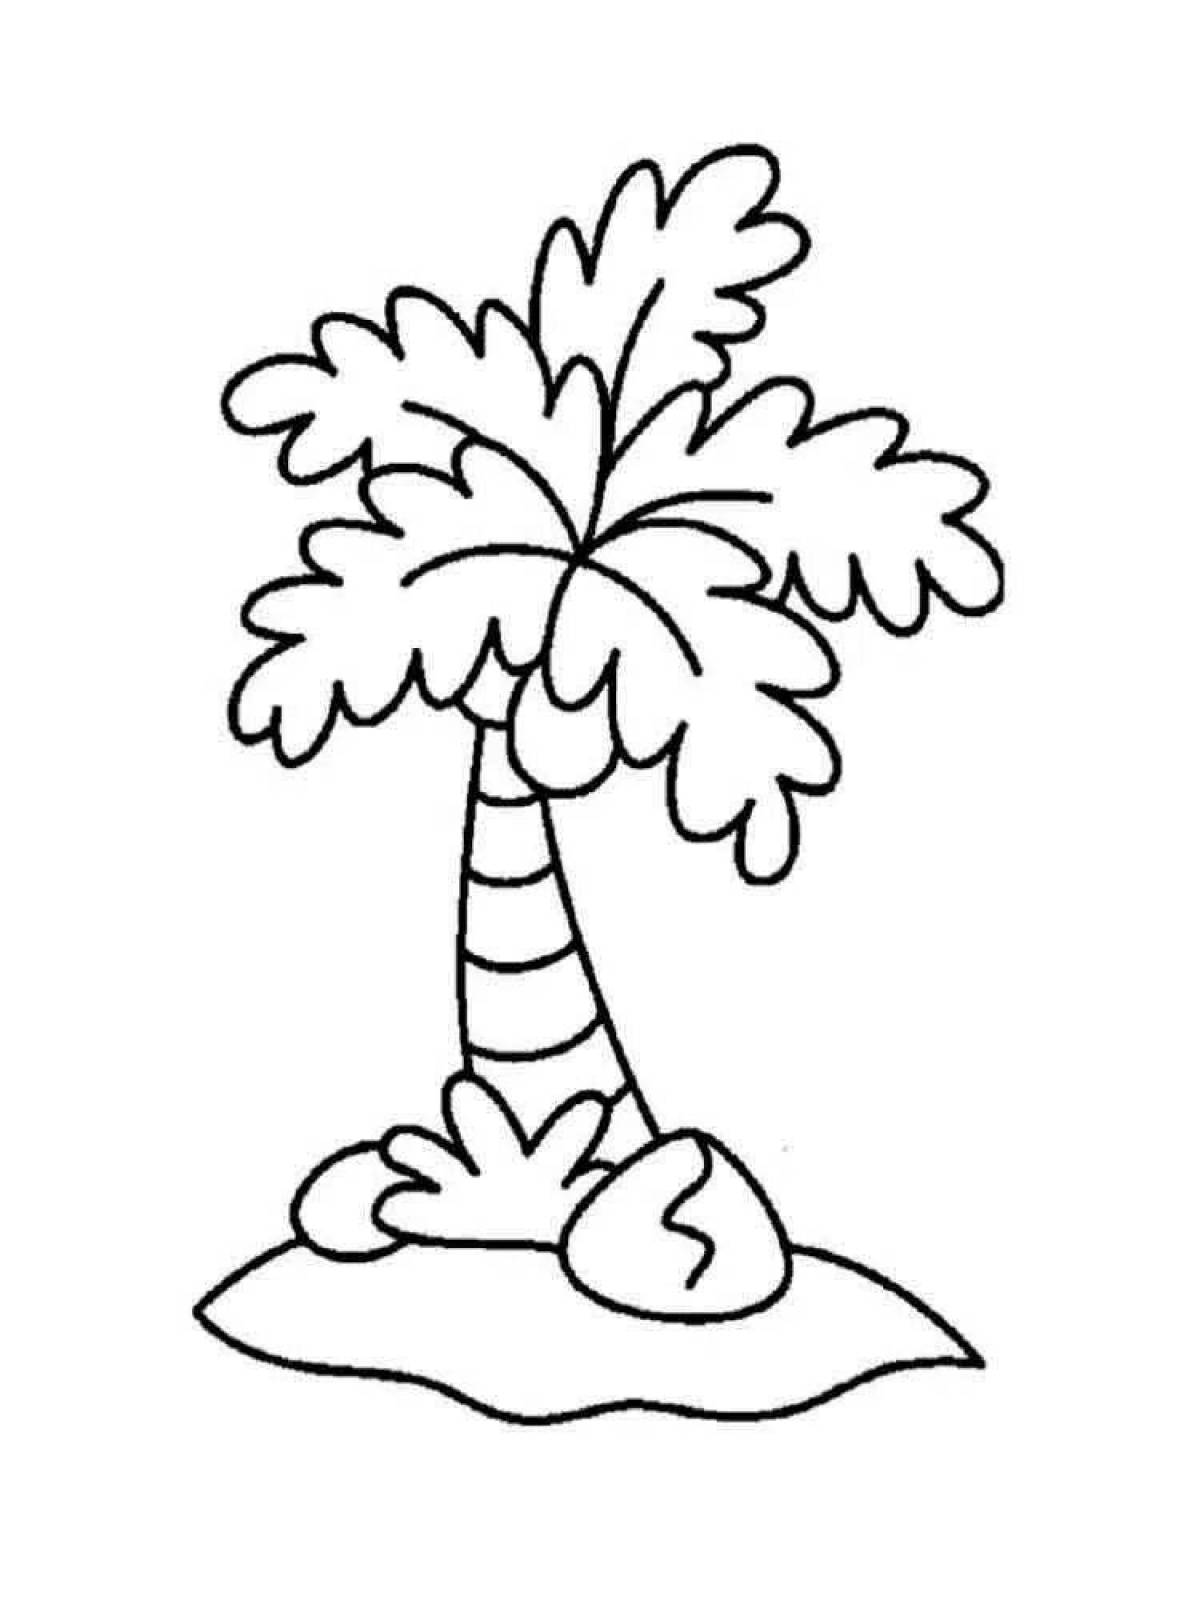 Merry palm tree coloring book for kids